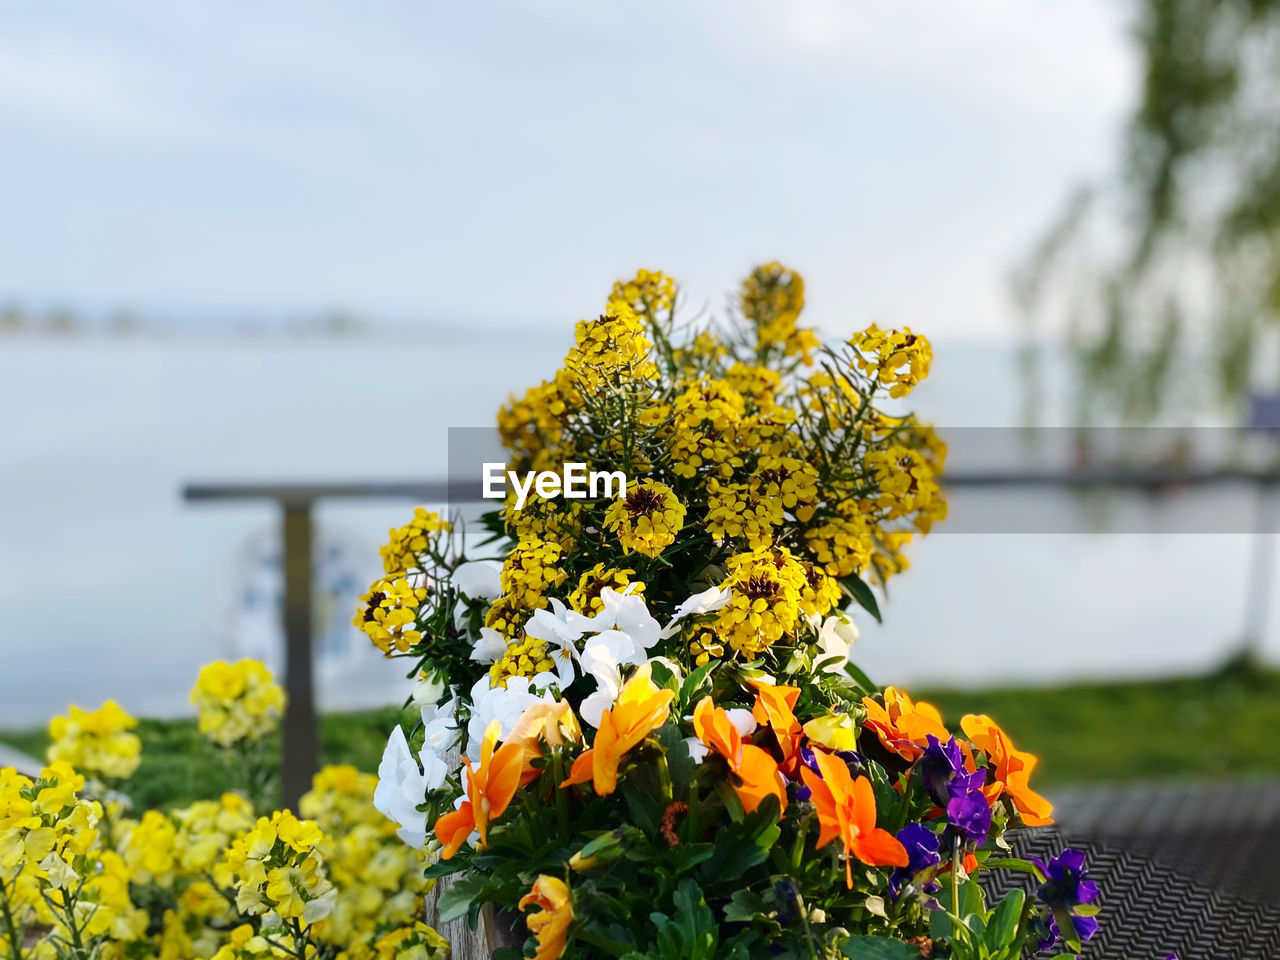 flowering plant, flower, plant, yellow, beauty in nature, freshness, nature, water, focus on foreground, fragility, sky, no people, growth, day, springtime, tranquility, blossom, flower head, outdoors, lake, close-up, multi colored, landscape, wildflower, scenics - nature, land, inflorescence, environment, tranquil scene, travel destinations